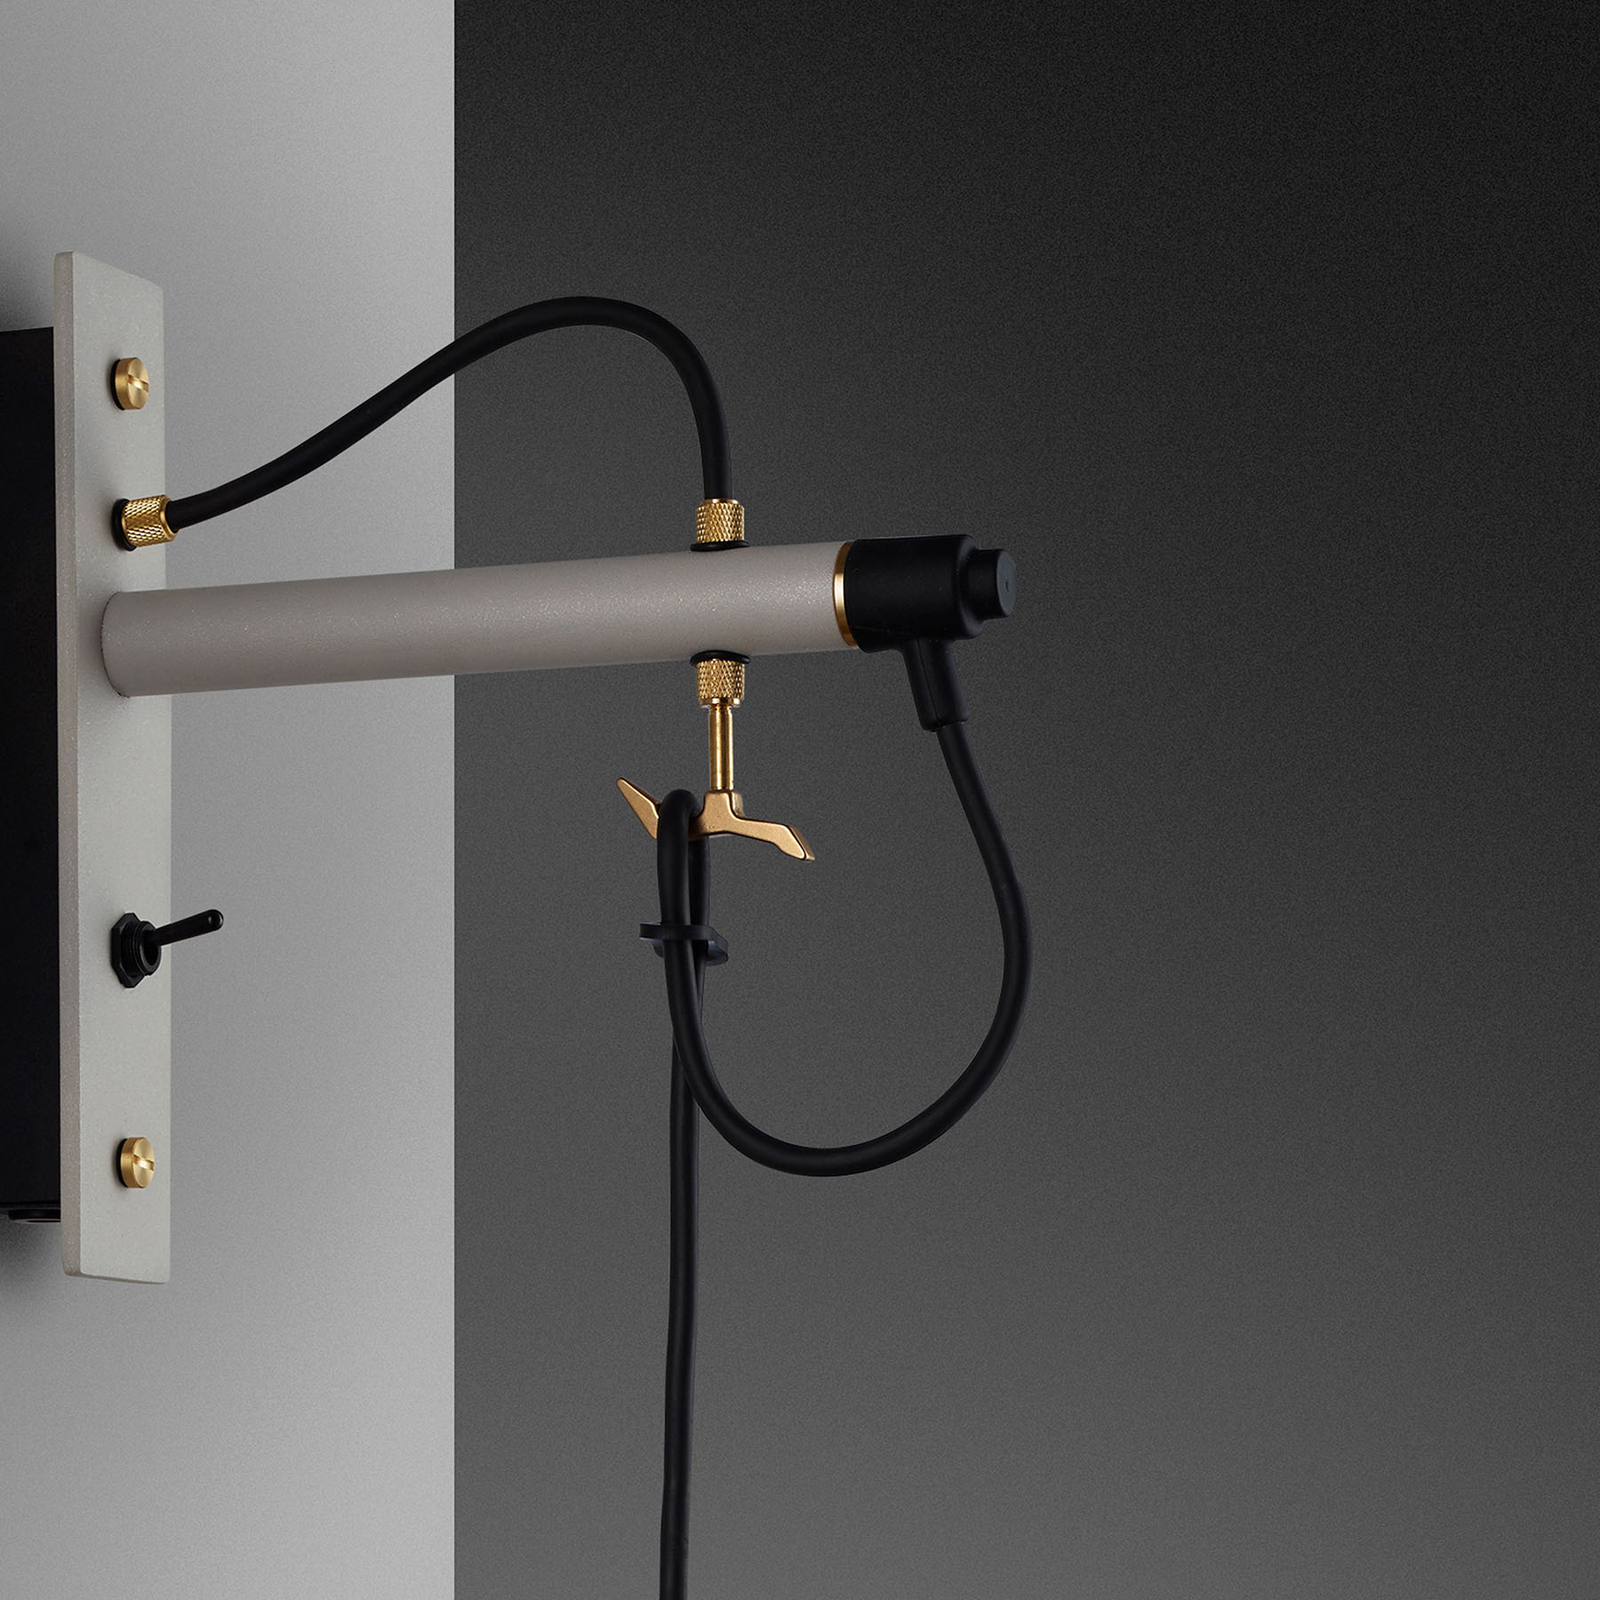 Buster + Punch Hooked Wall large grey/brass